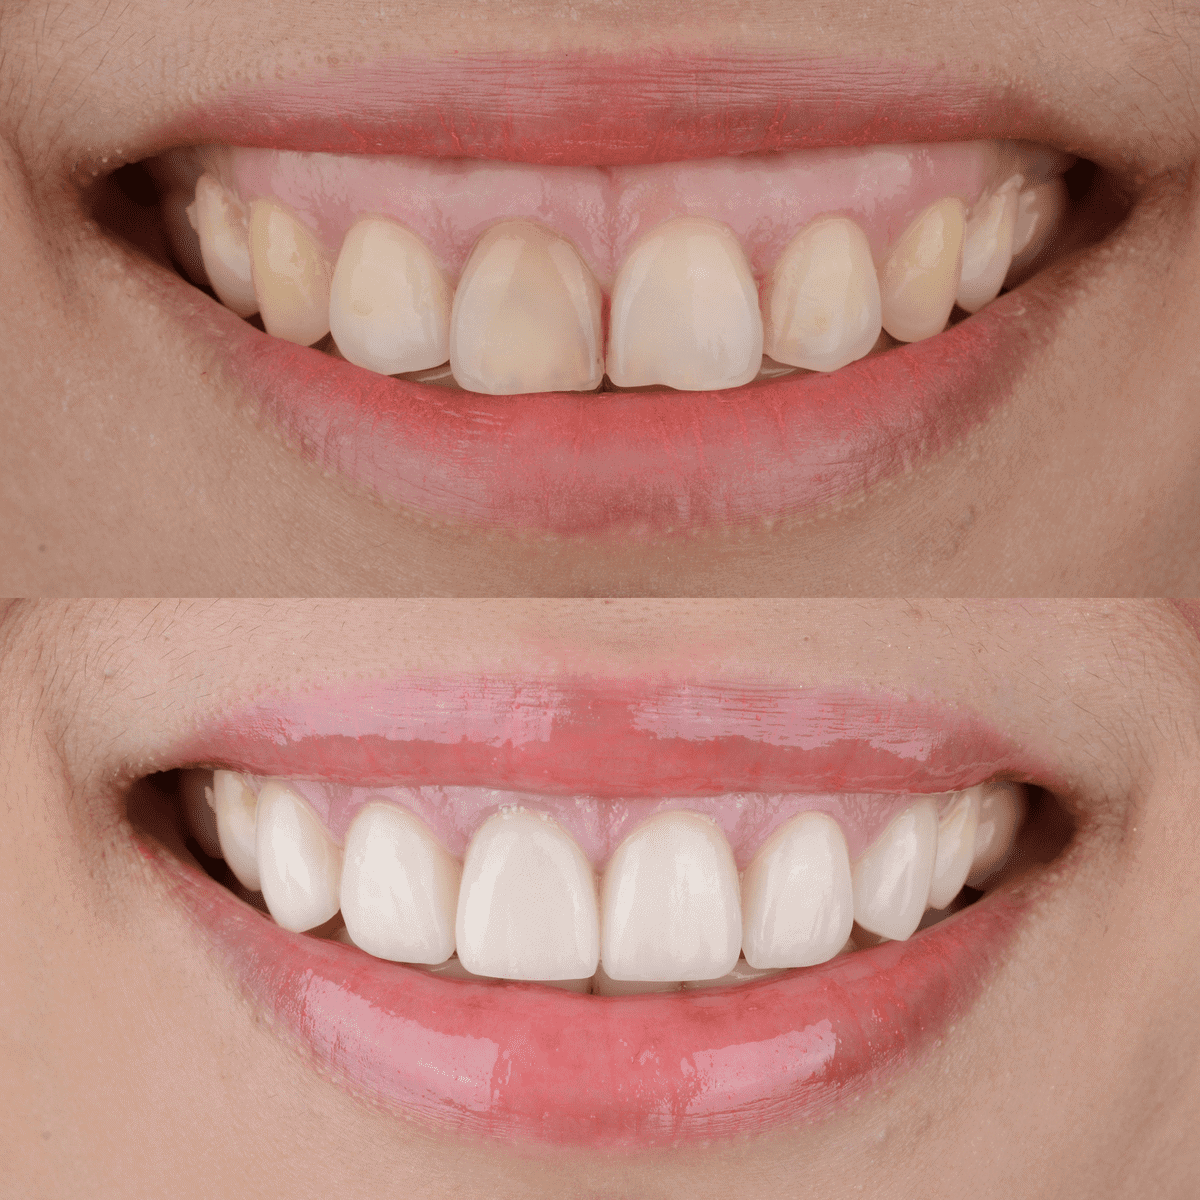 A comparison of excessive gingival display before and after treatment